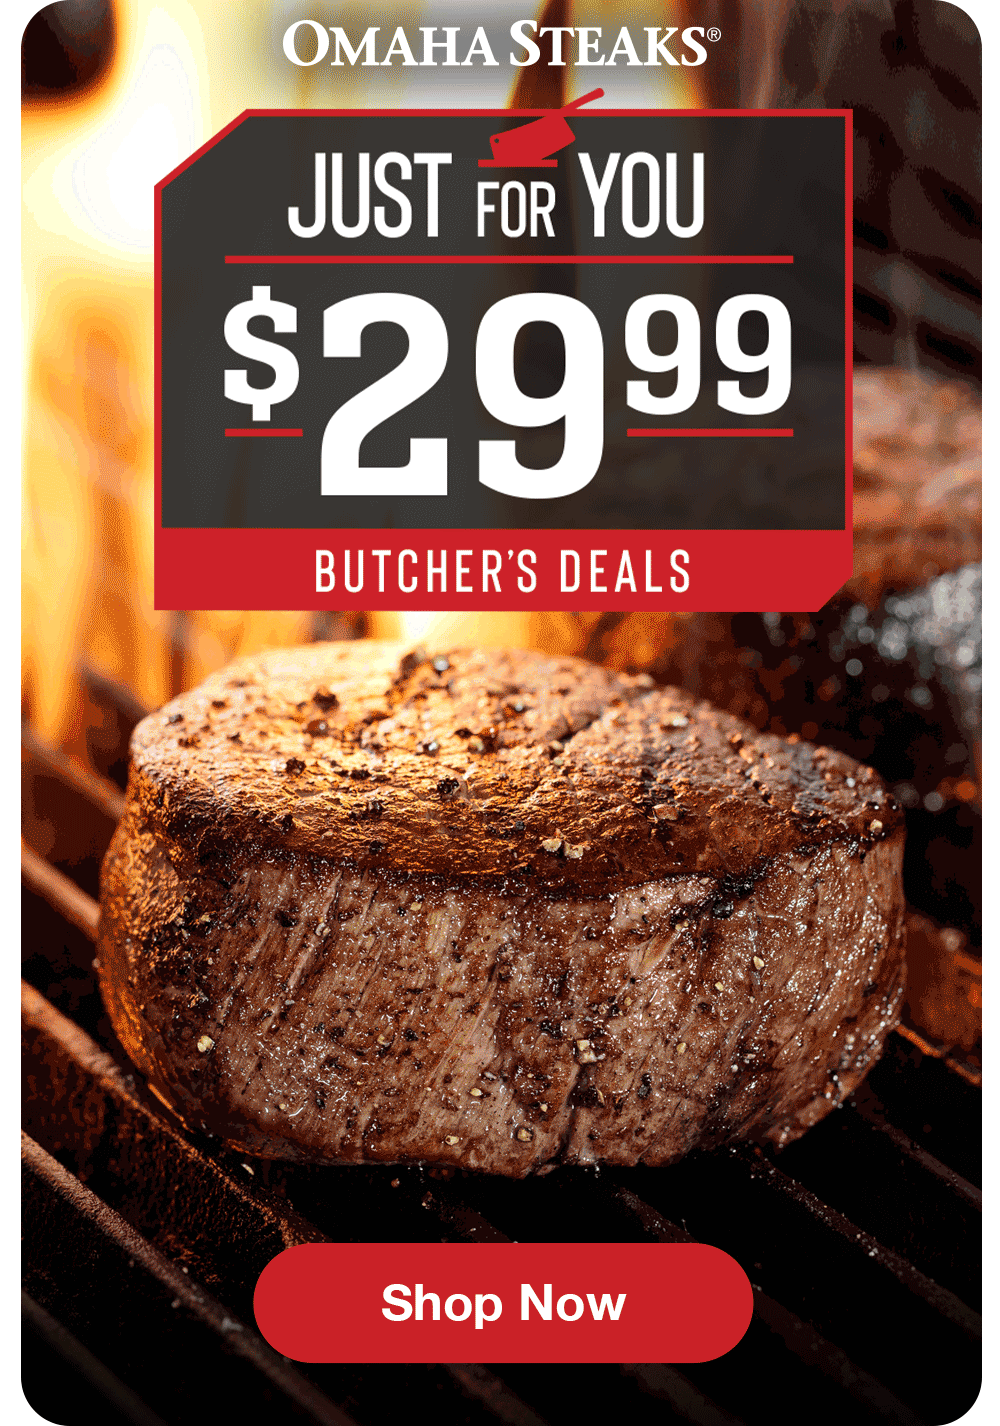 Omaha Steaks® JUST FOR YOU - $29.99 BUTCHER'S DEALS || SHOP NOW